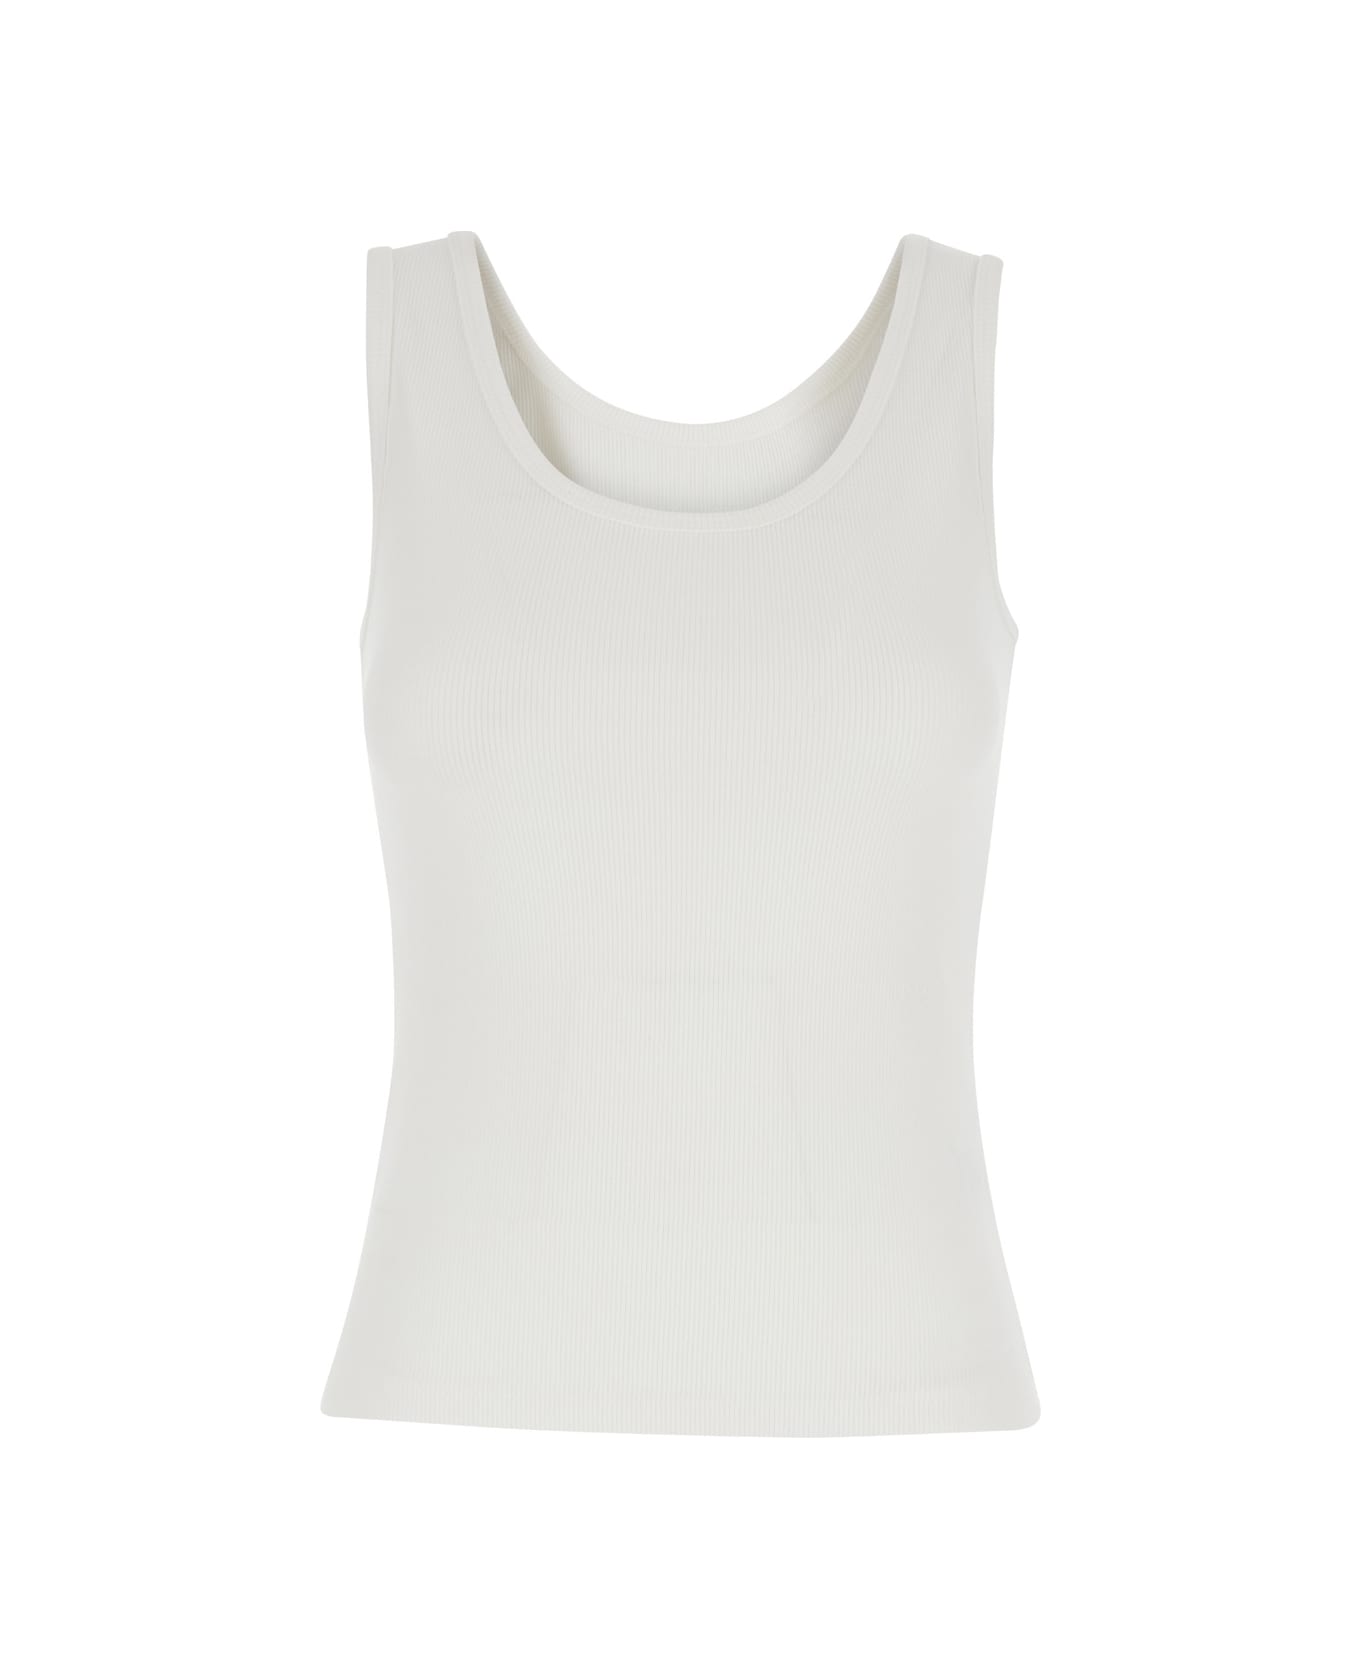 Dunst White Tank Top In Cotton Blend Woman - White タンクトップ